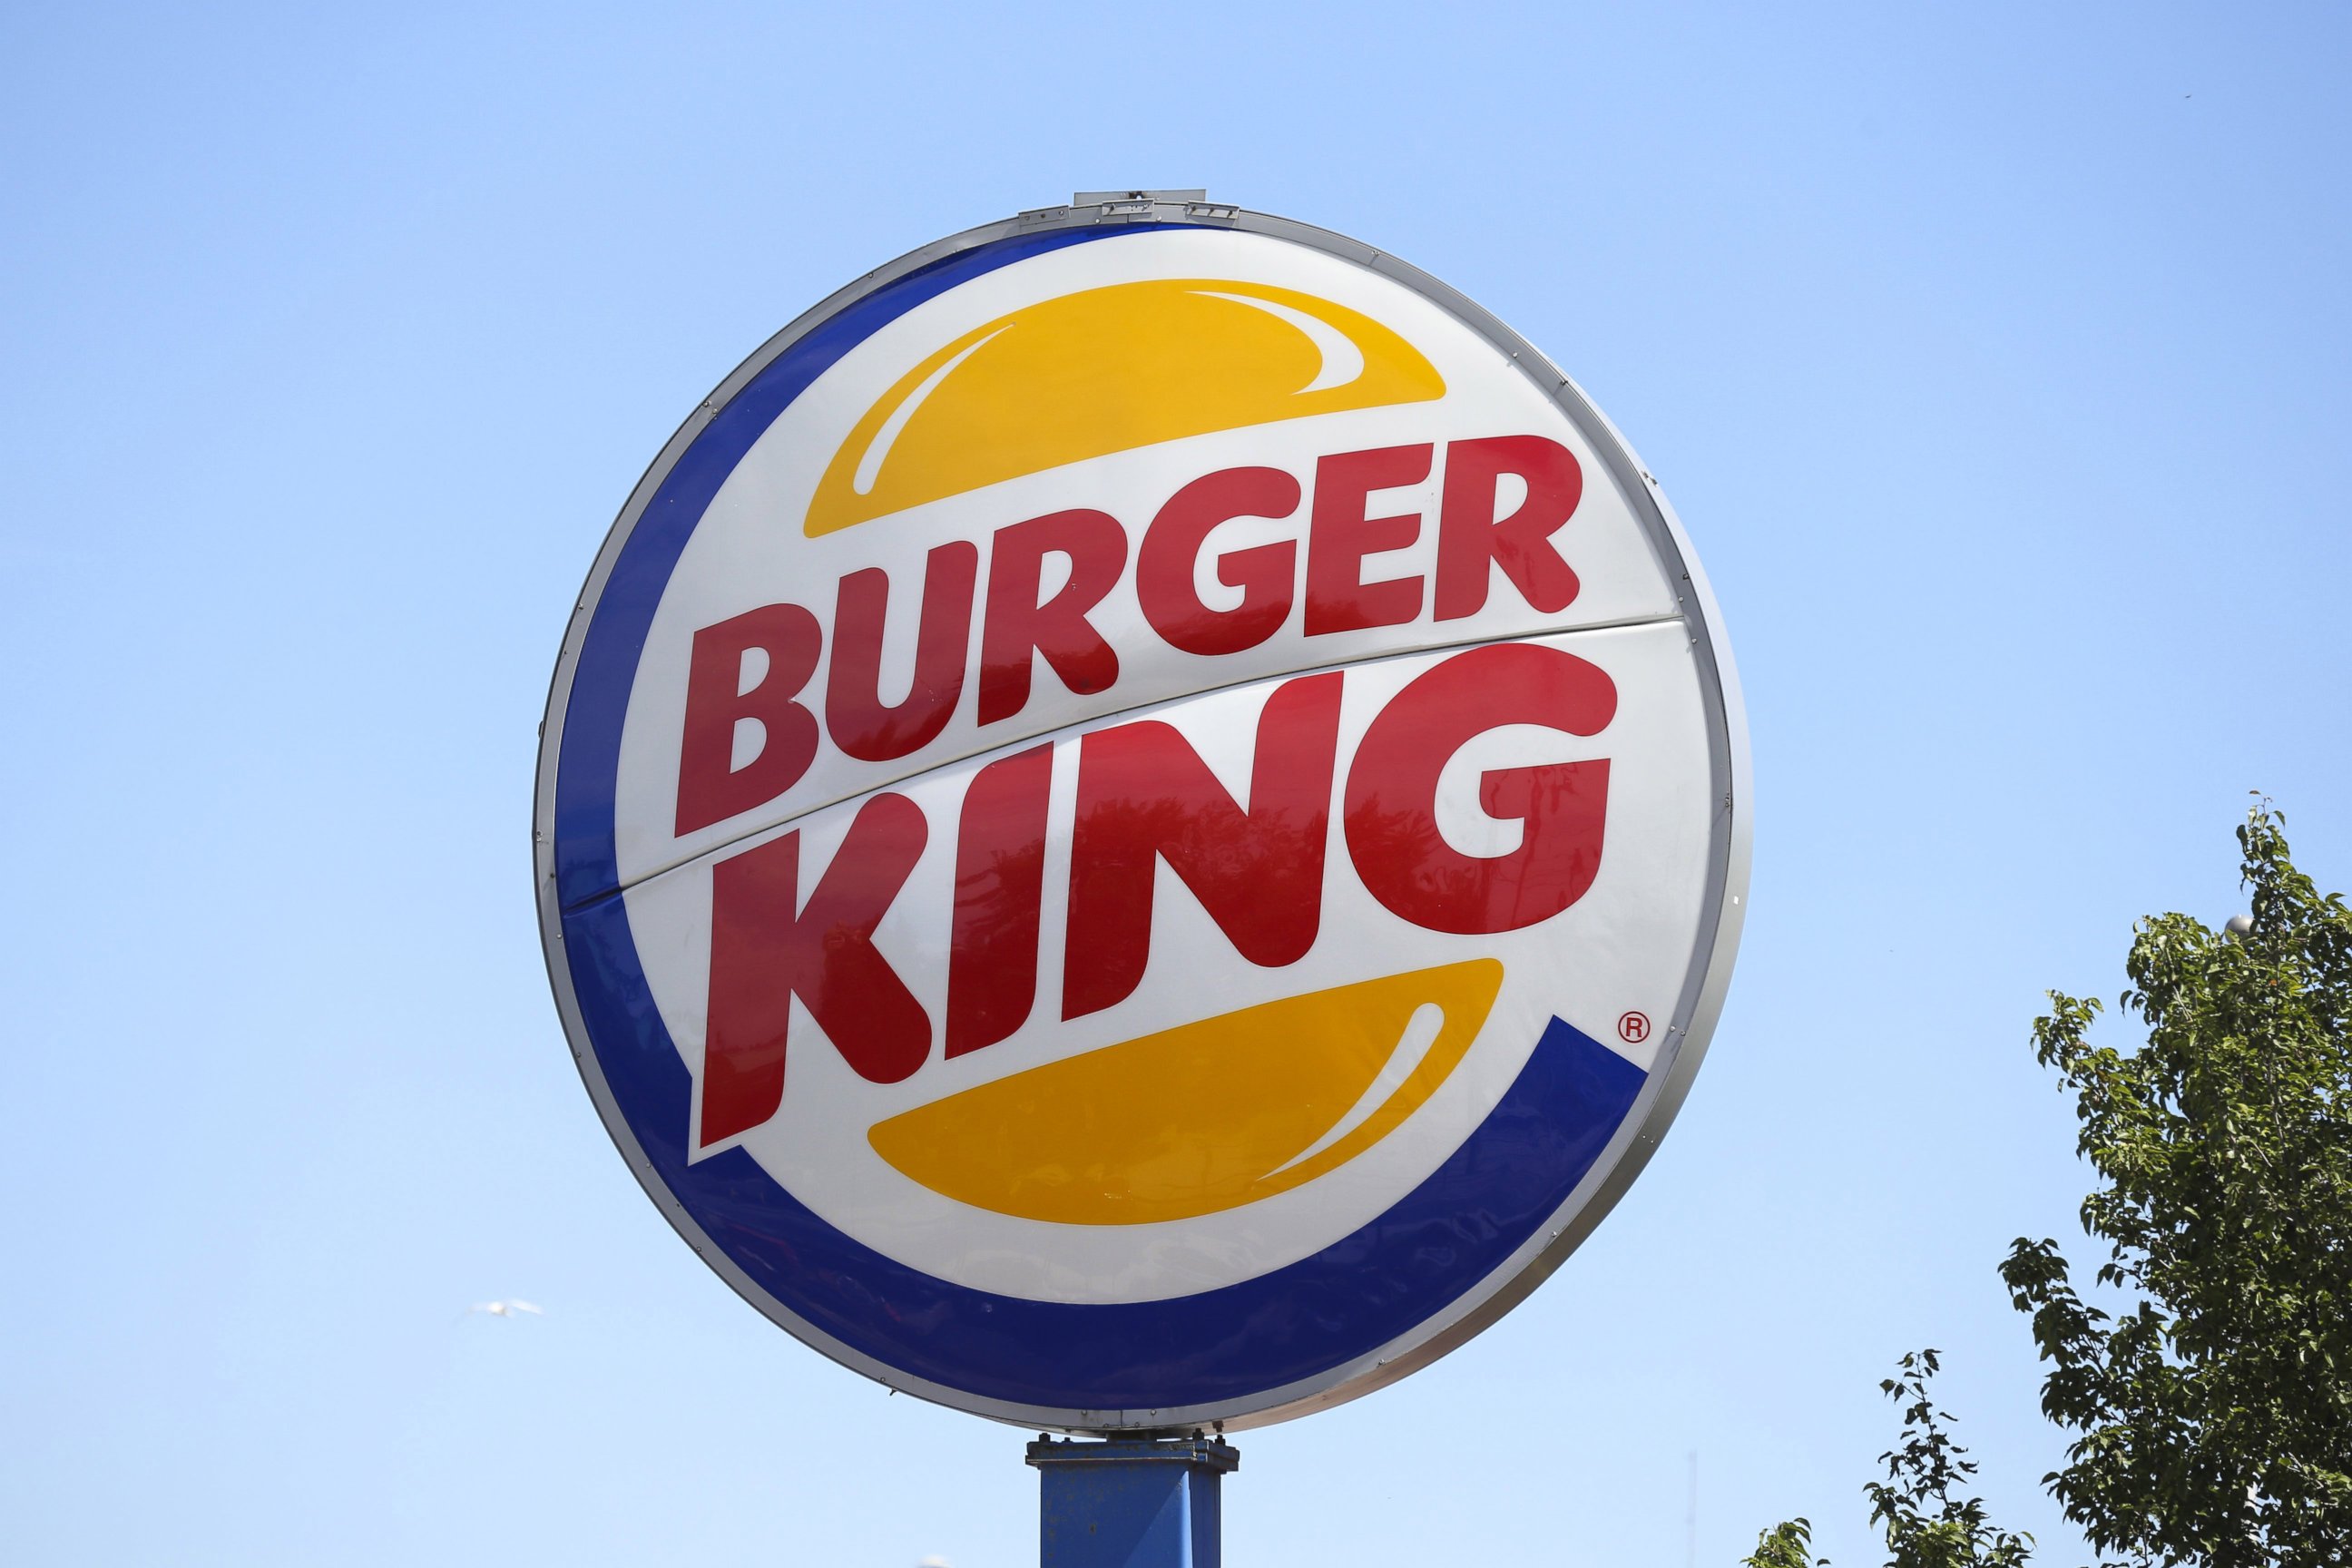 PHOTO: A Burger King sign is seen in Toronto, Ontario on Aug. 27, 2014.